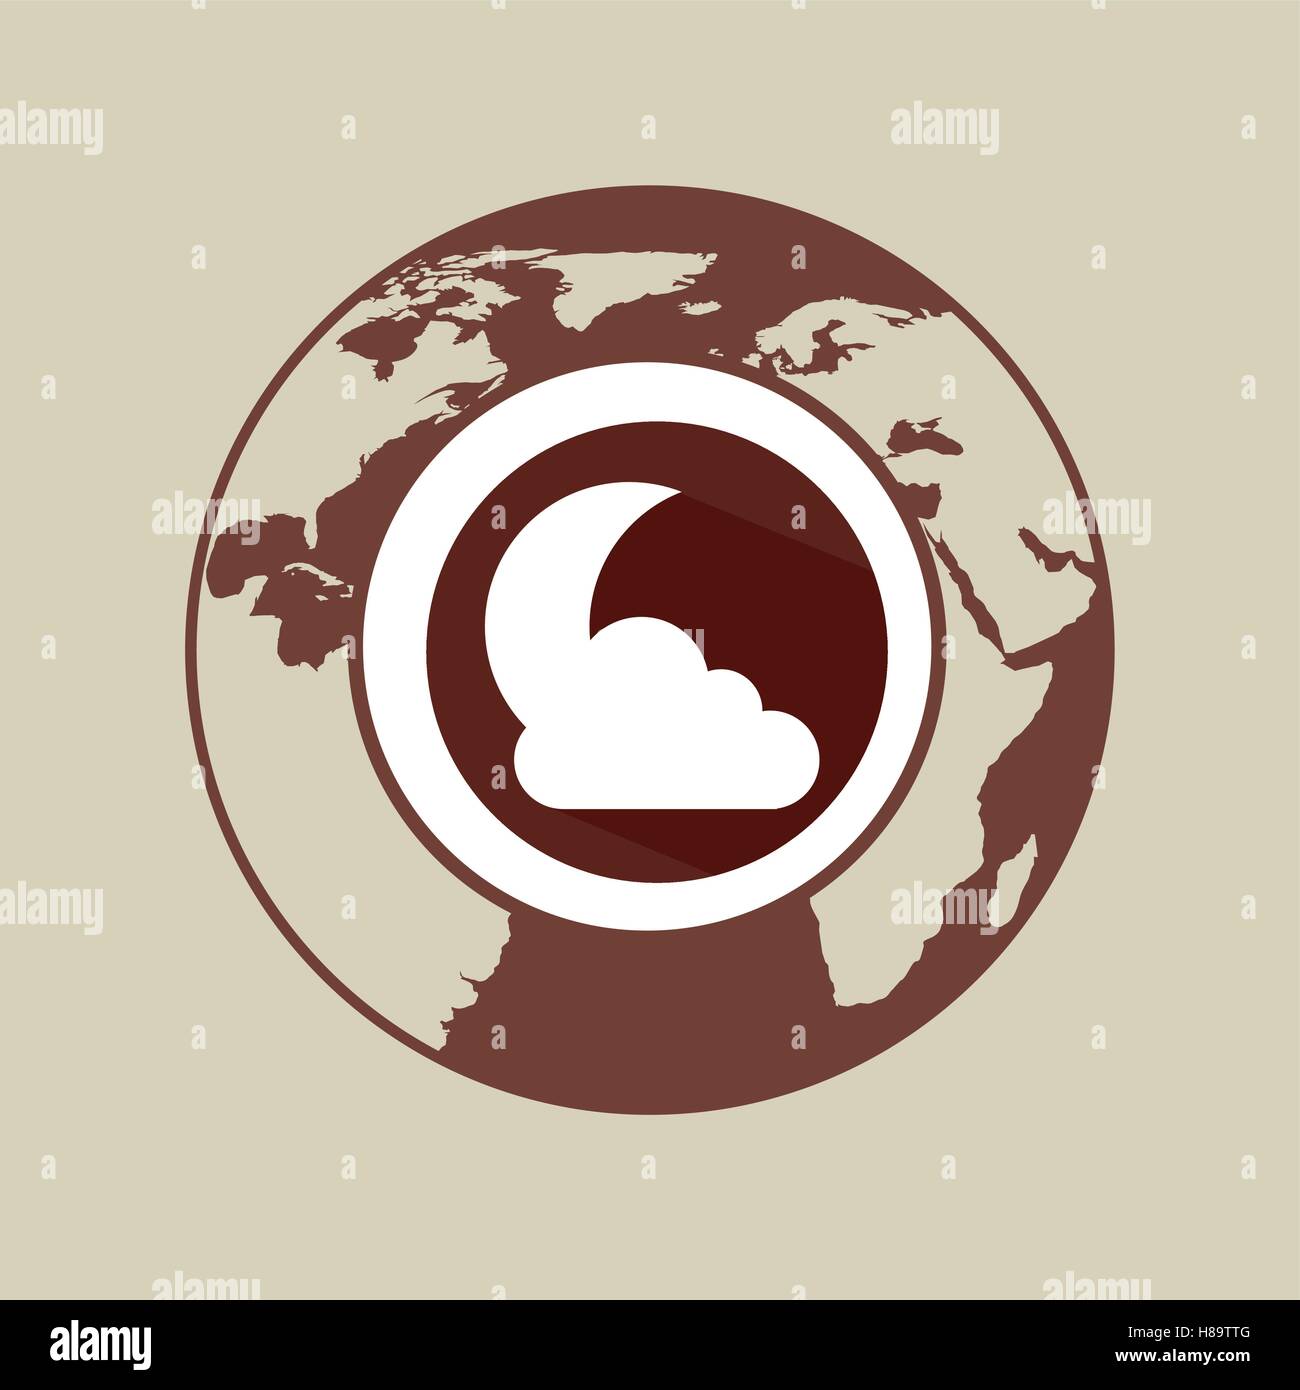 weather forecast globe with shadow icon graphic vector ilustration eps 10 Stock Vector